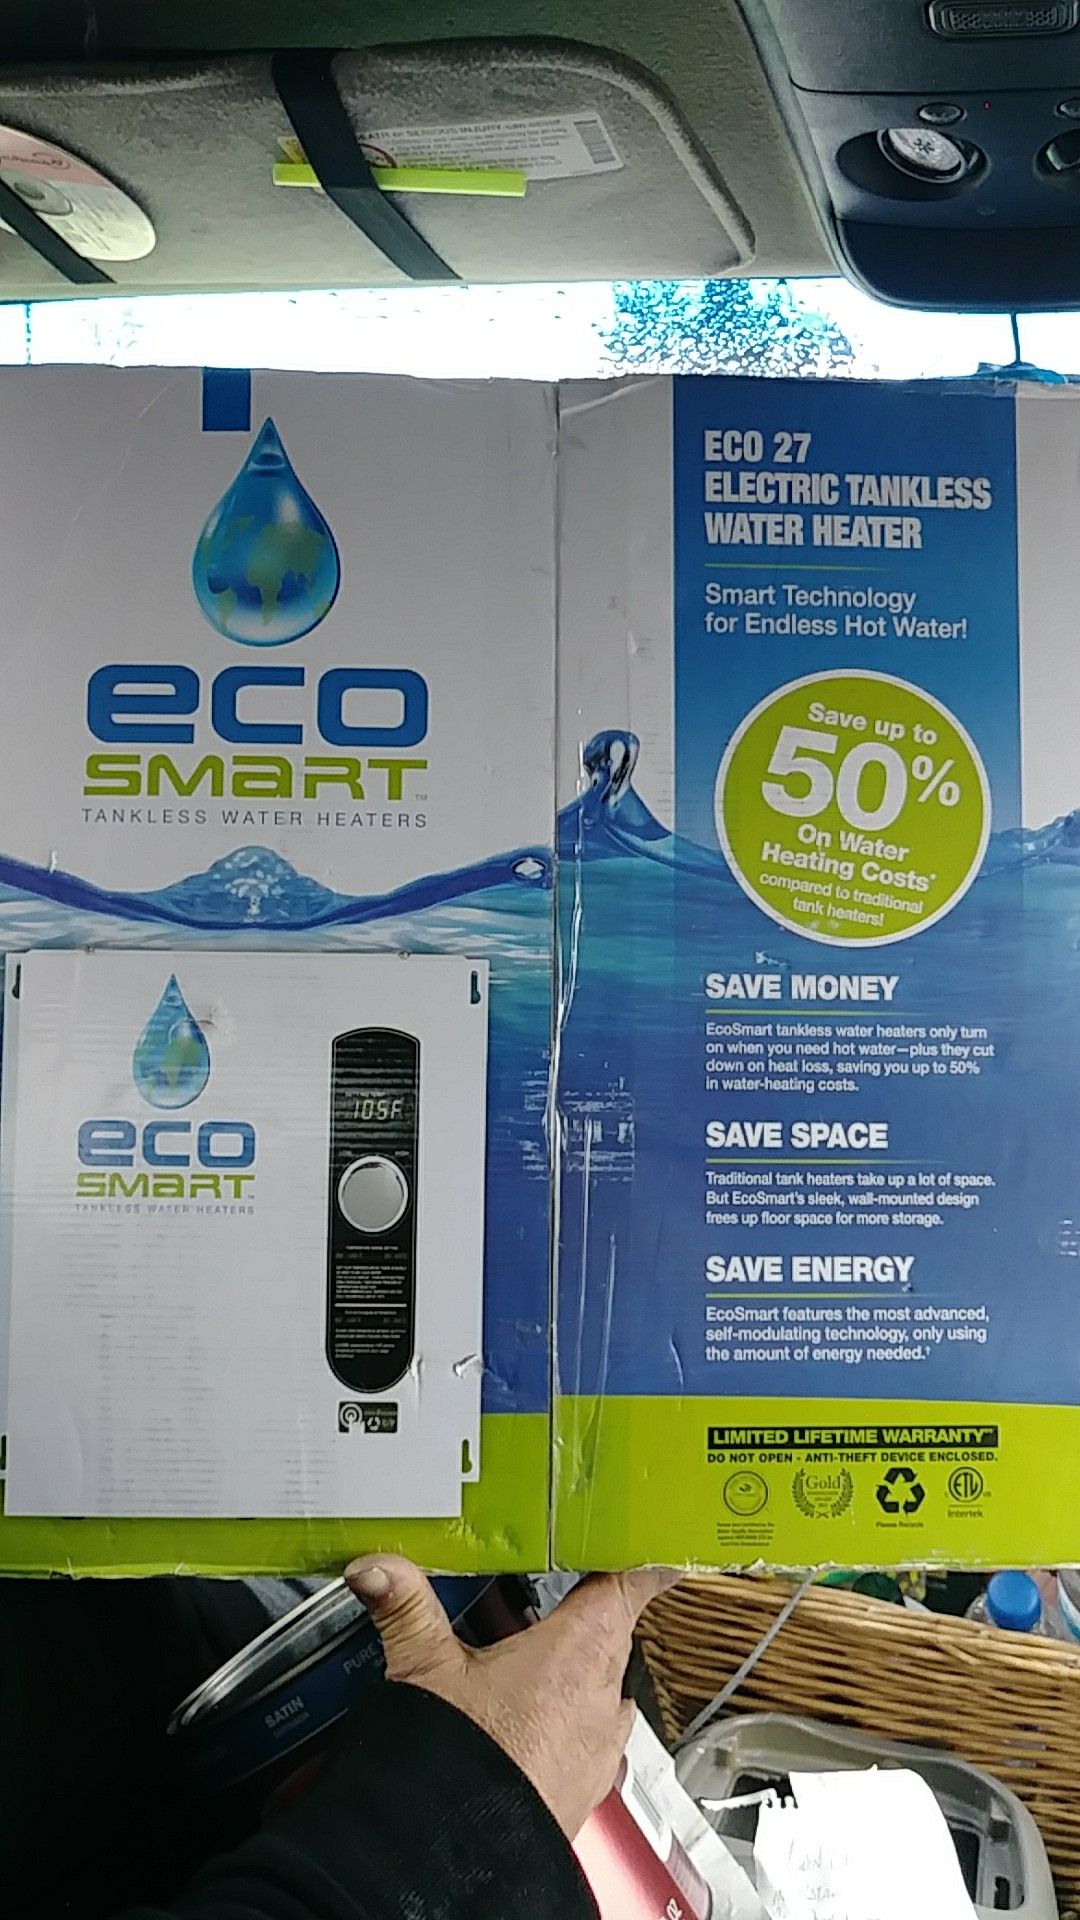 Eco Smart 27 Electric Tankless Water Heater